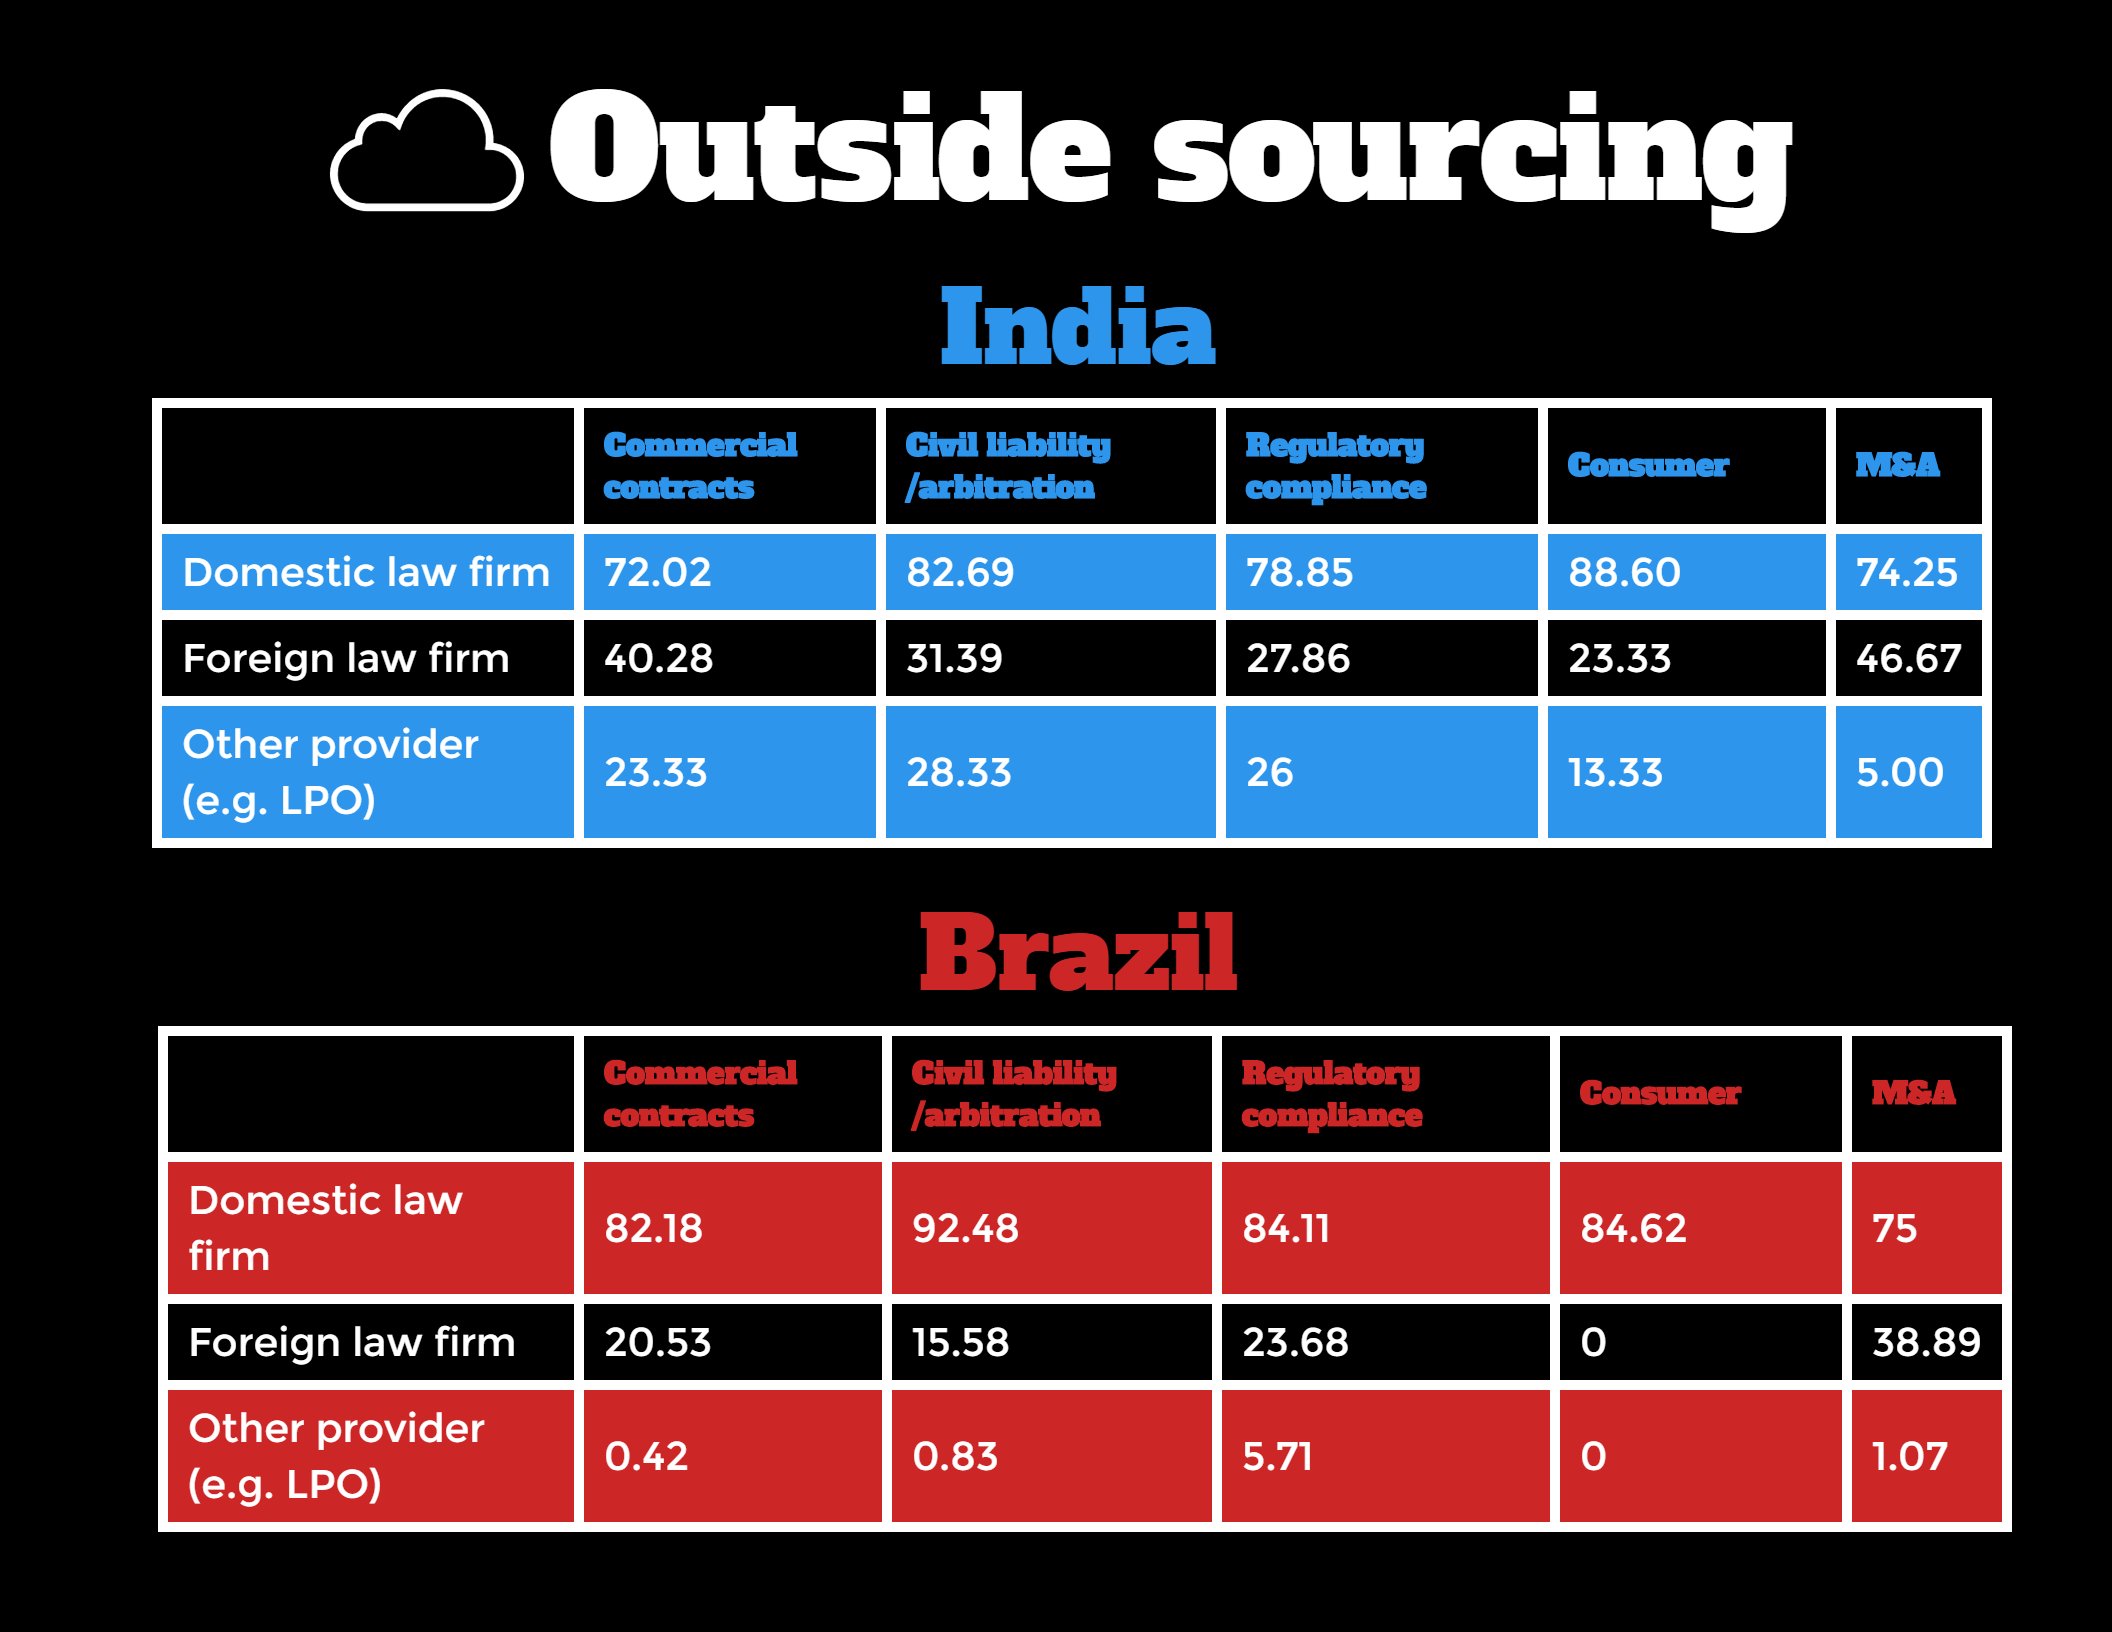 Amount of outside sourcing for different practice areas between India and Brazil.